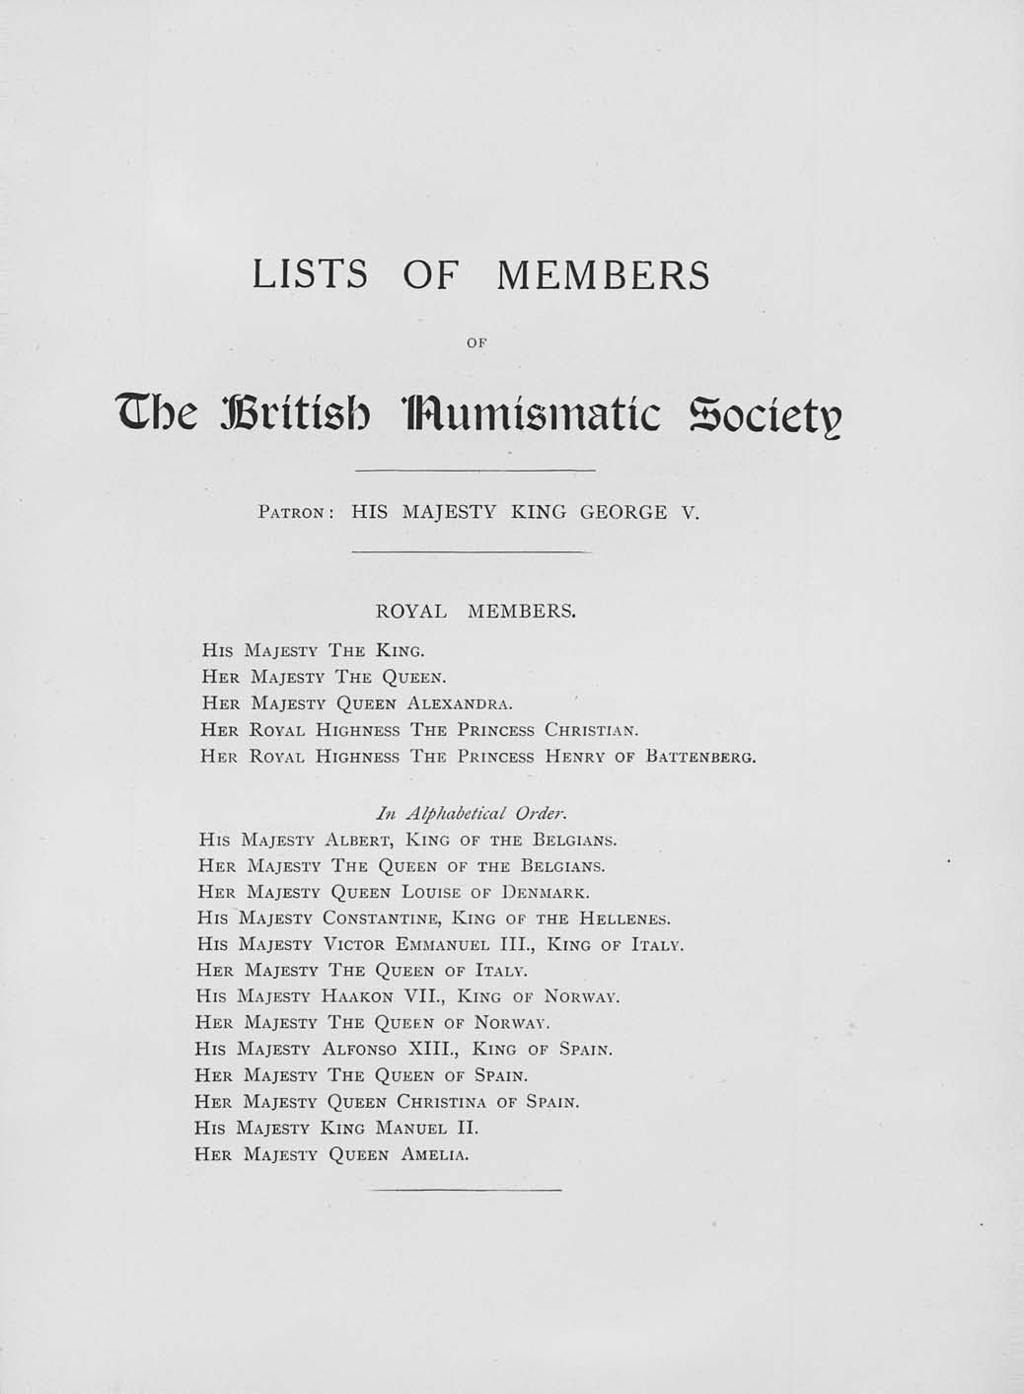 LISTS OF MEMBERS OF TLhe British IRurmsmatic Society PATRON: HIS MAJESTY KING GEORGE V. ROYAL MEMBERS. His MAJESTY THE KING. HER MAJESTY THE QUEEN. HER MAJESTY QUEEN ALEXANDRA.